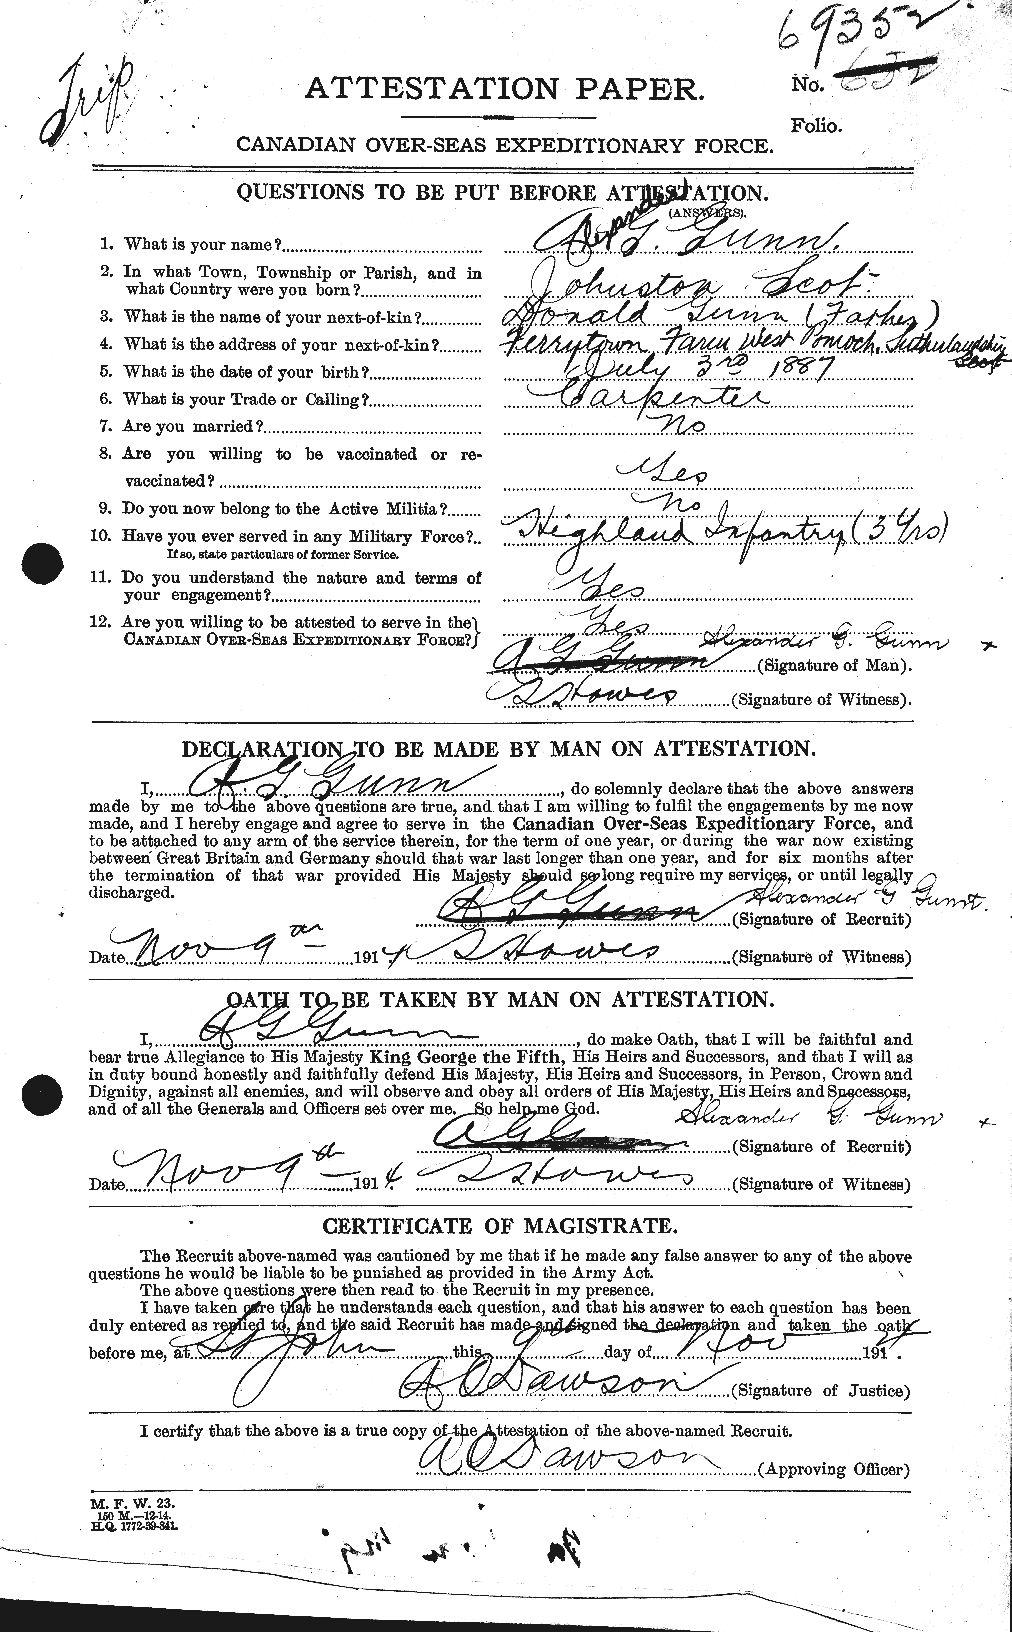 Personnel Records of the First World War - CEF 367990a